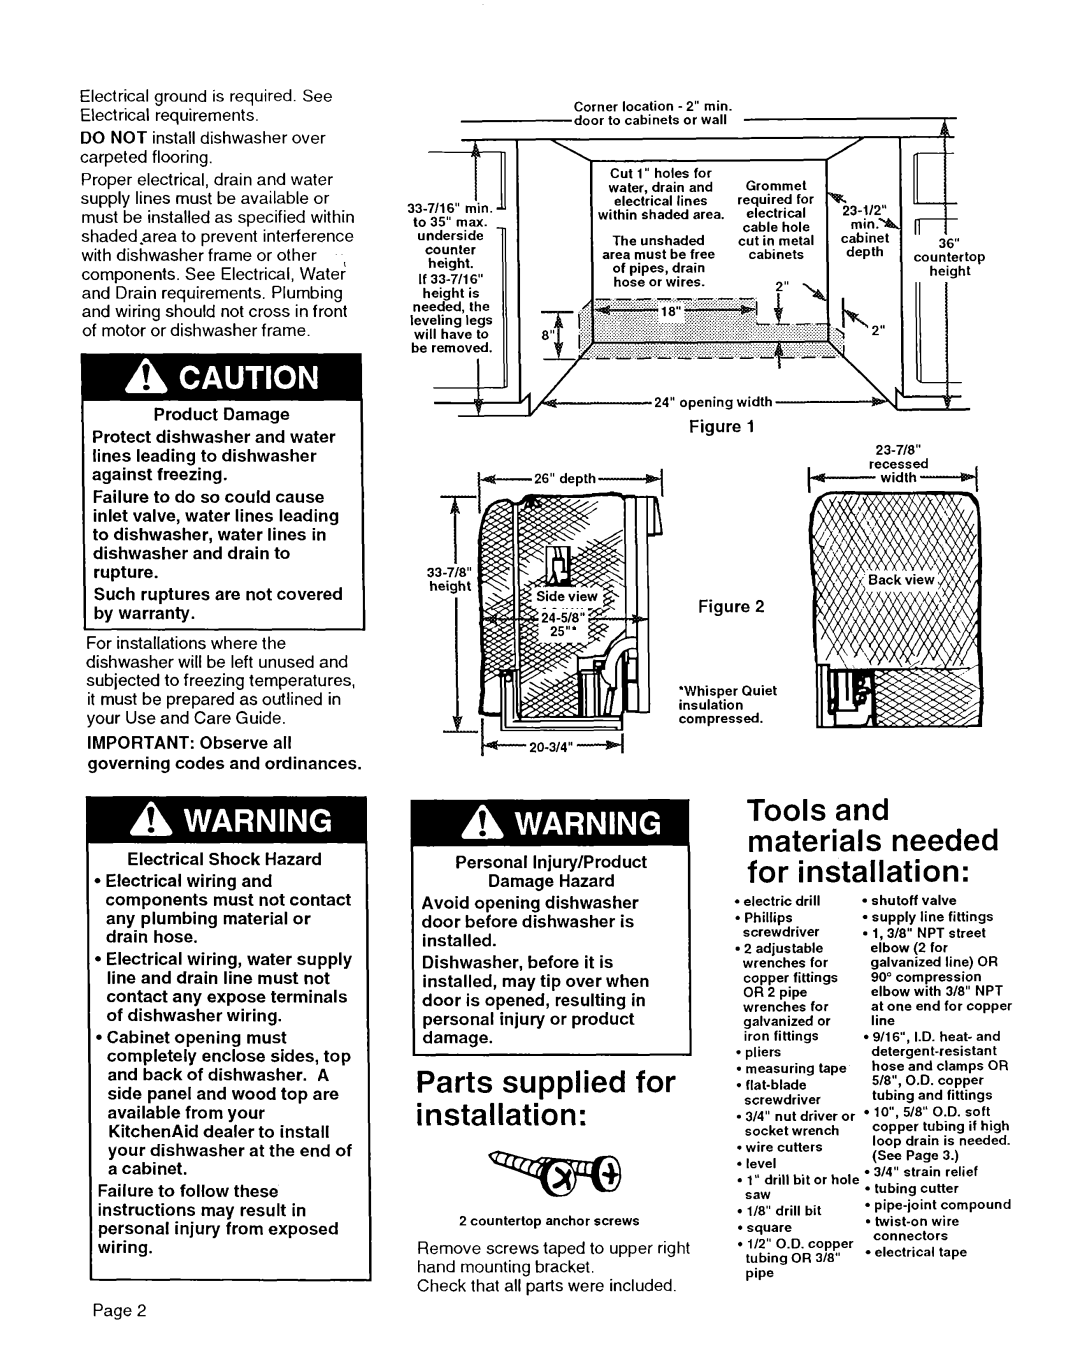 KitchenAid 9741159 installation instructions Parts supplied for installation, Tools and materials needed for installation 